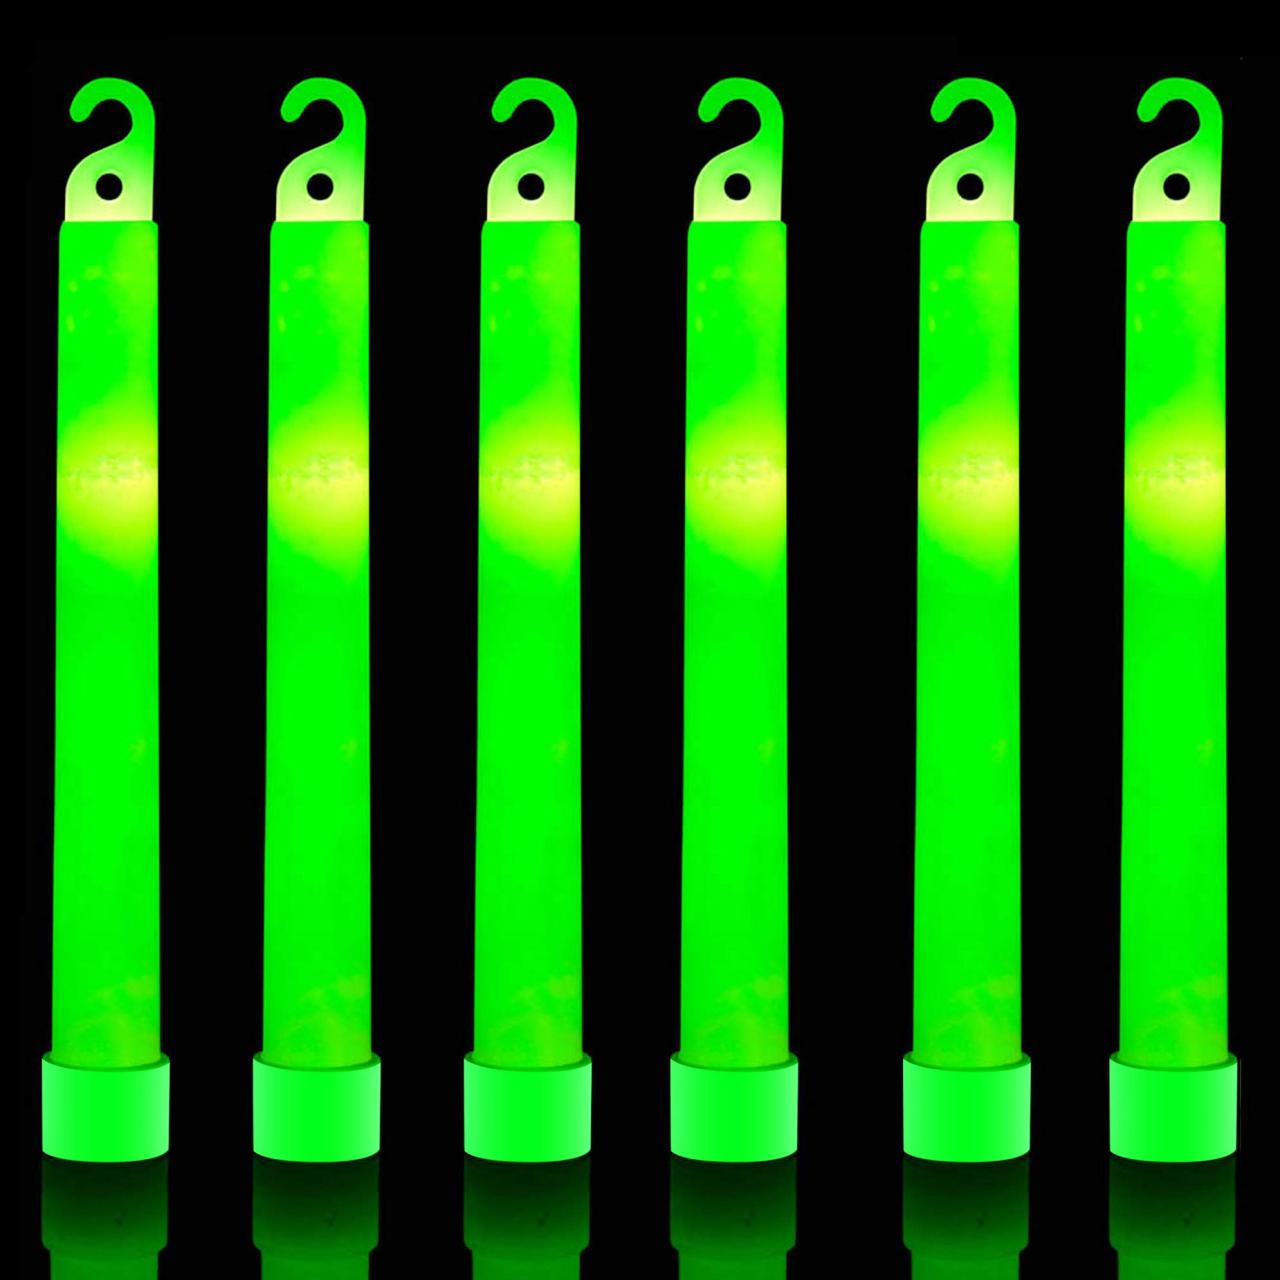 Amazon.Com: 32 Ultra Bright 6 Inch Large Green Glow Sticks - Chem Lights  Sticks With 12 Hour Duration - Camping Glow Sticks, Emergency Glow Sticks  For Storms Blackouts - Glowsticks For Parties